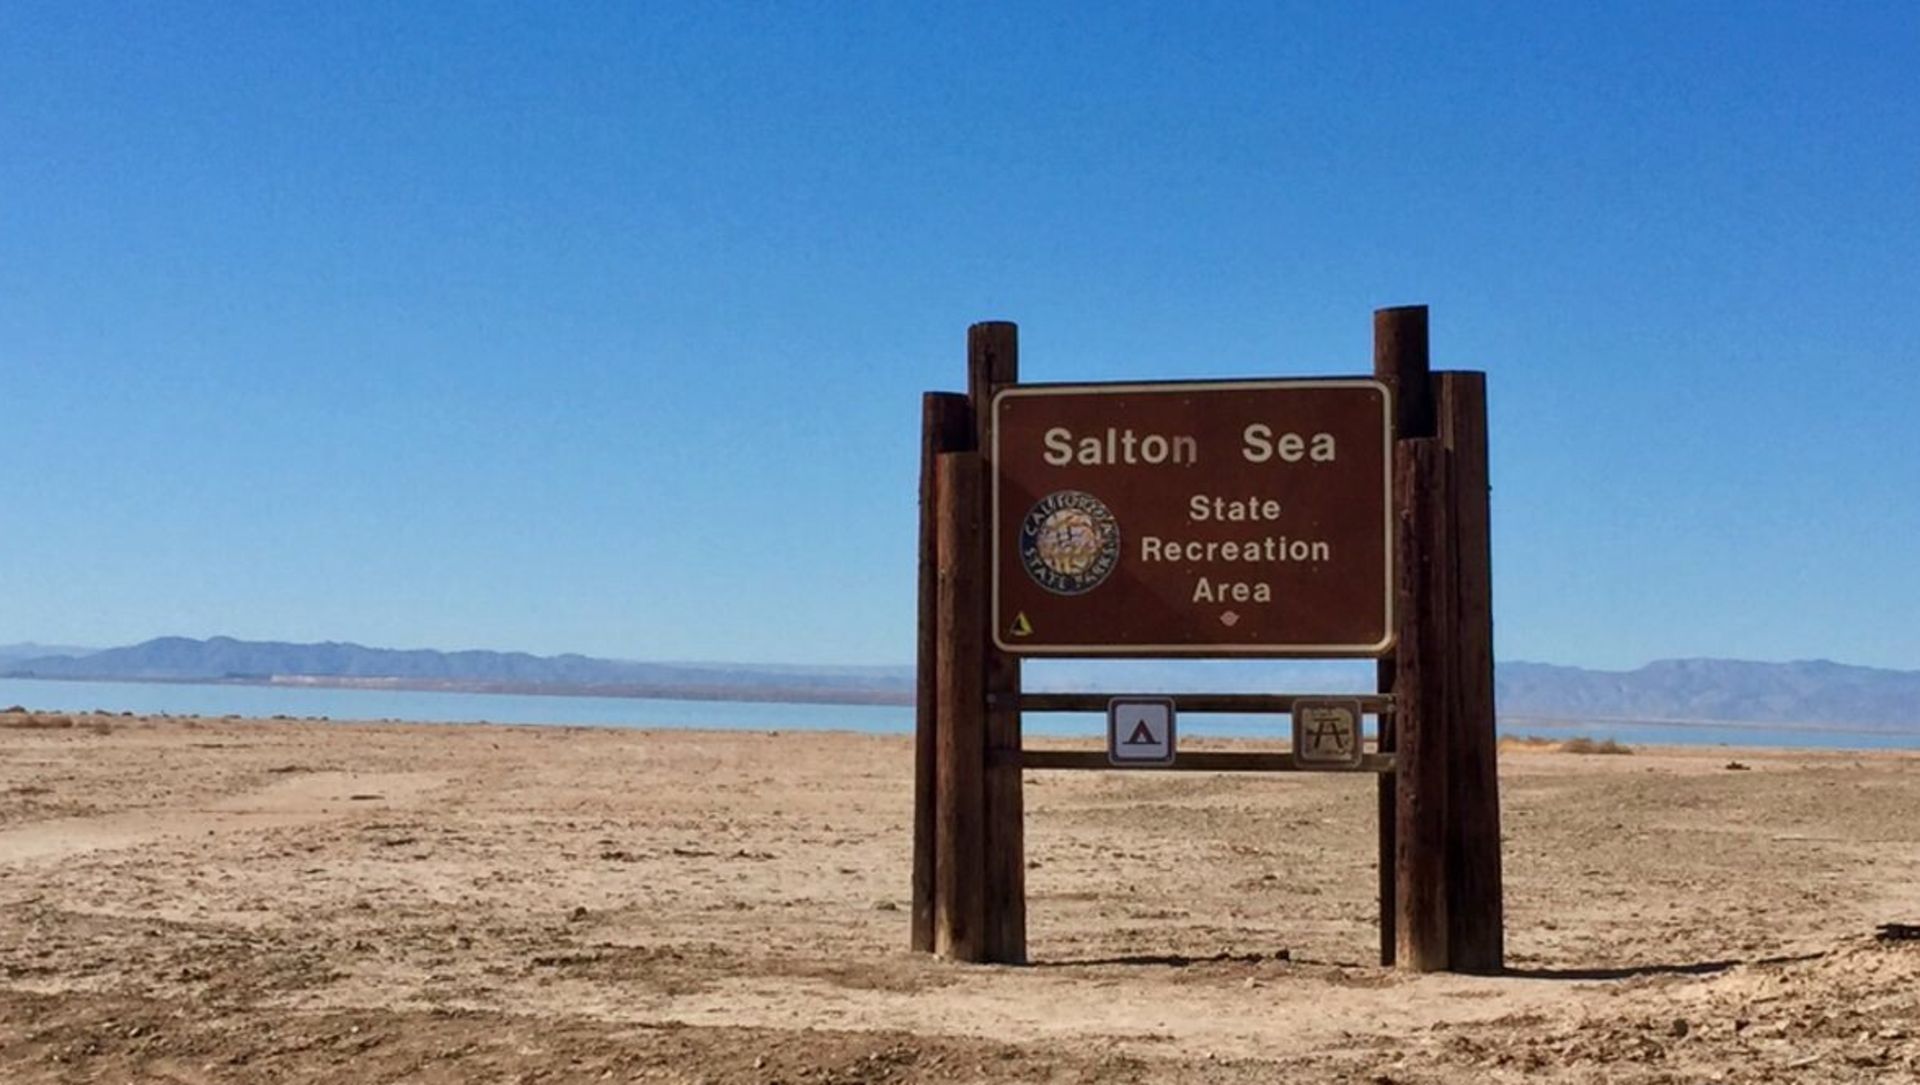 Experience thrilling adventures near the Salton Sea in Imperial County, CA! Welcome to excitement! - Image 14 of 14